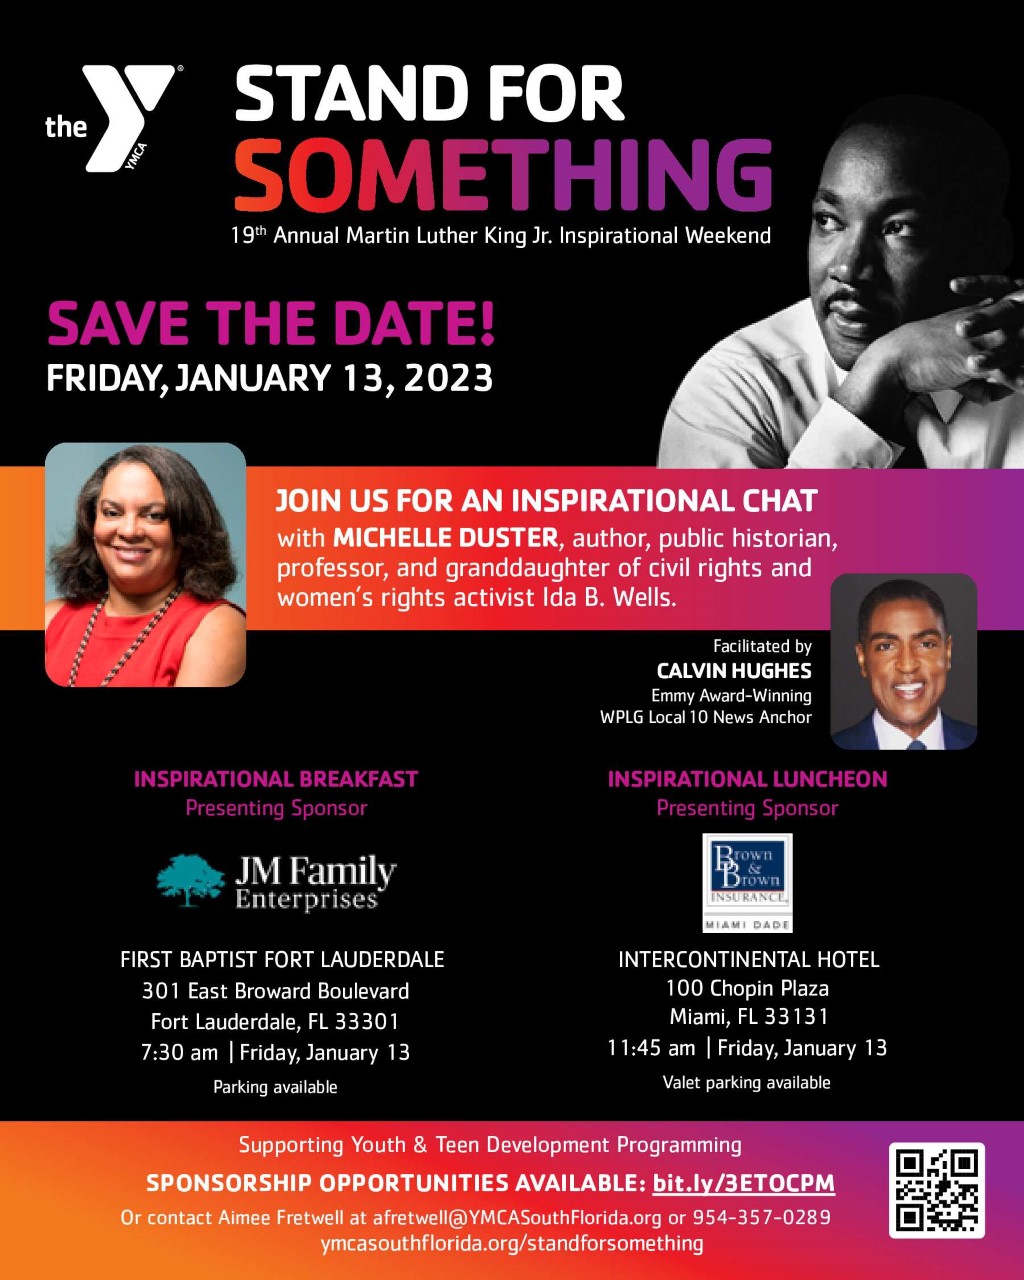 ymca-of-south-florida-to-host-annual-mlk-jr-inspirational-weekend